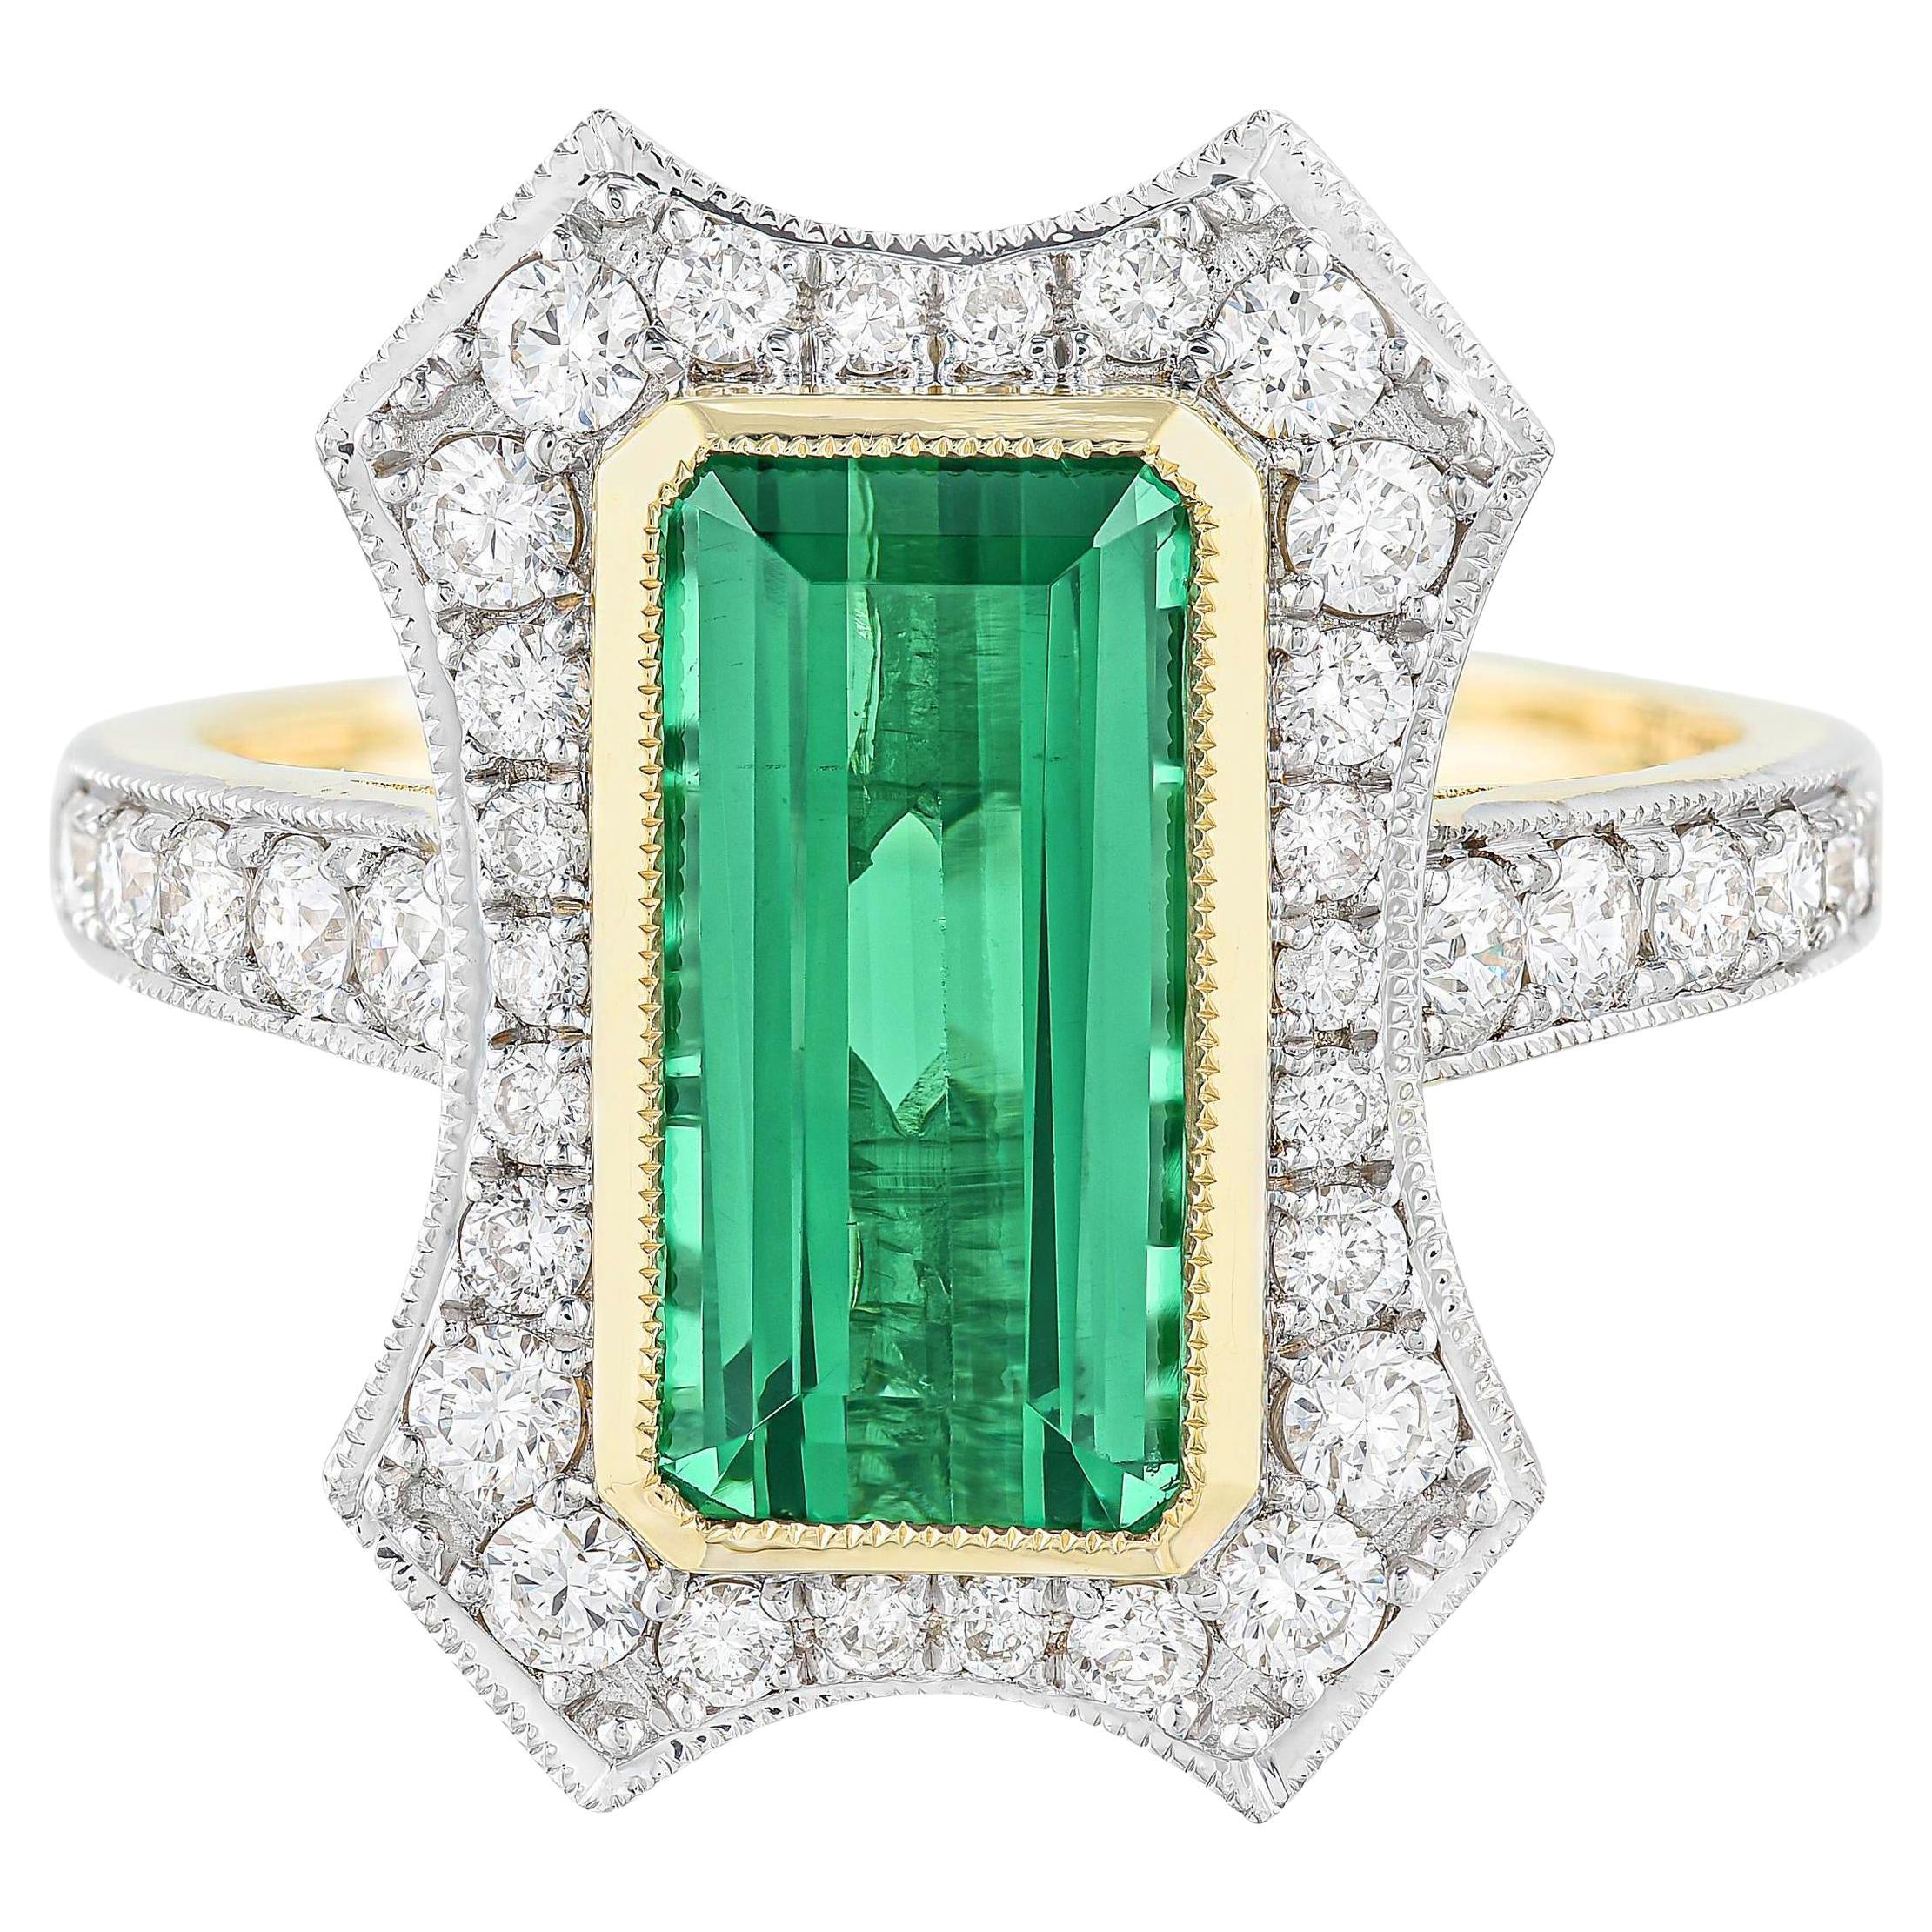 Exceptional Natural Green Tourmaline Ring Diamond Setting 3.42 Carats 14K Gold For Sale